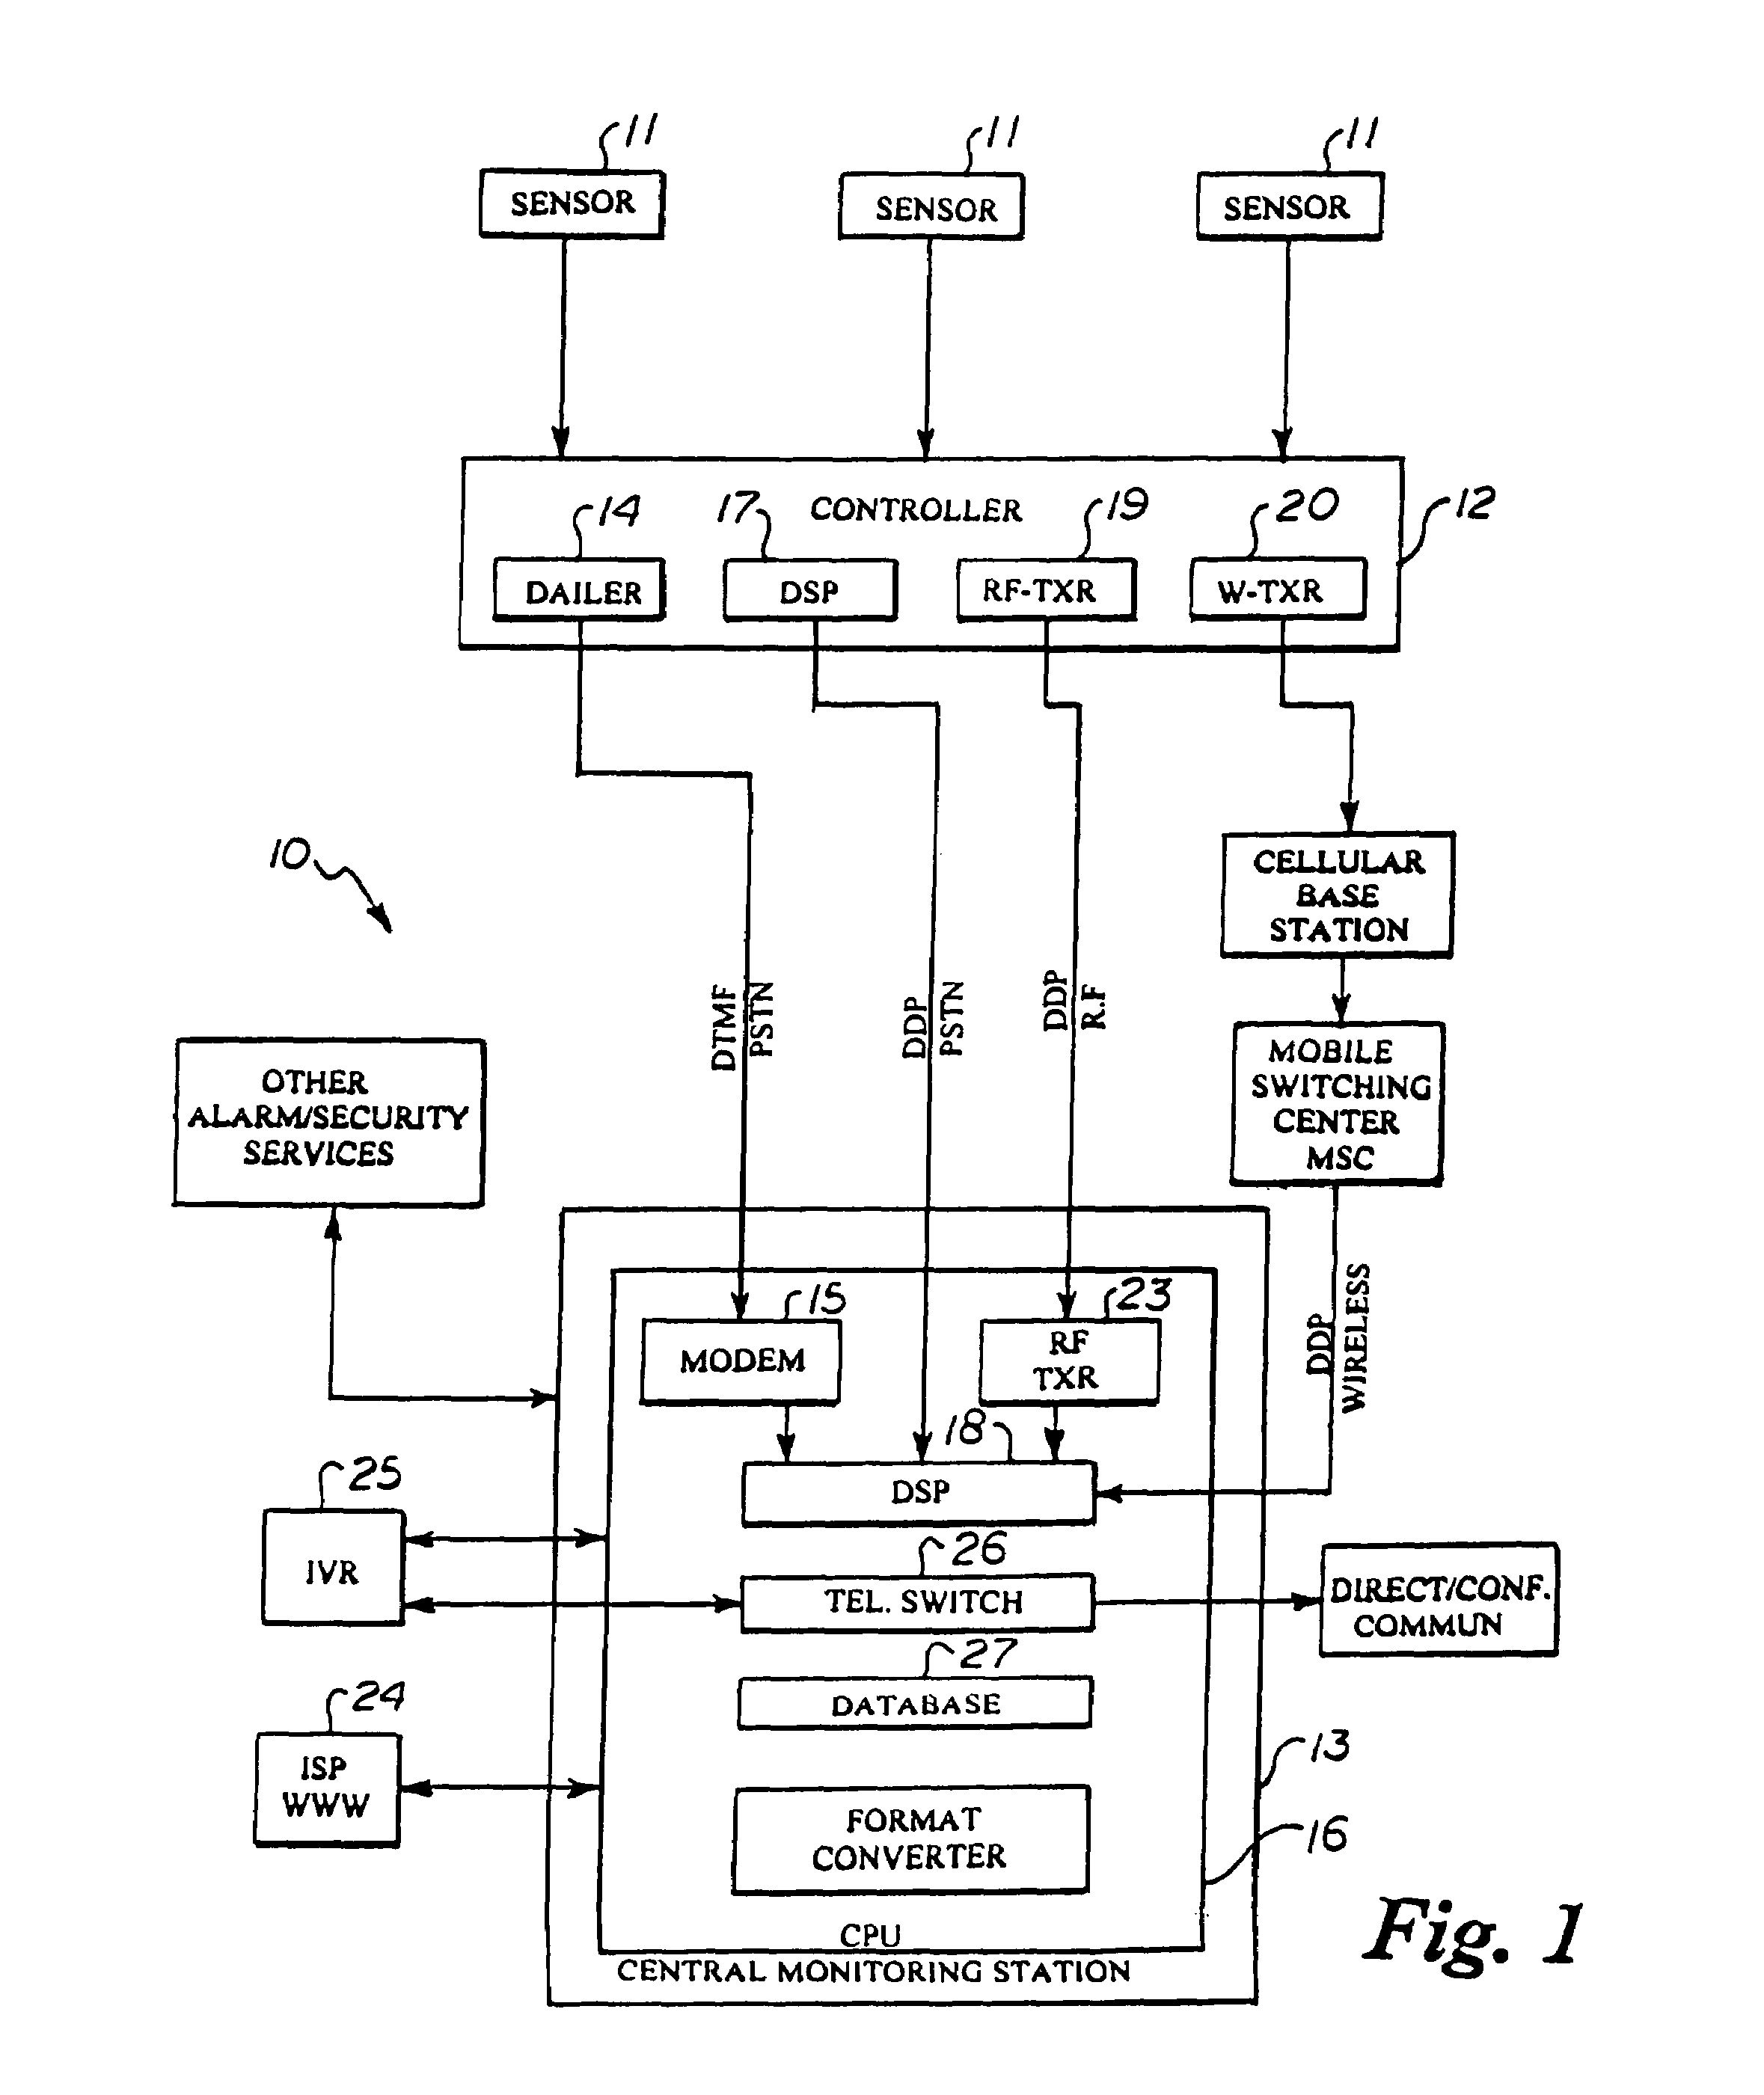 Automated parallel and redundant subscriber contact and event notification system